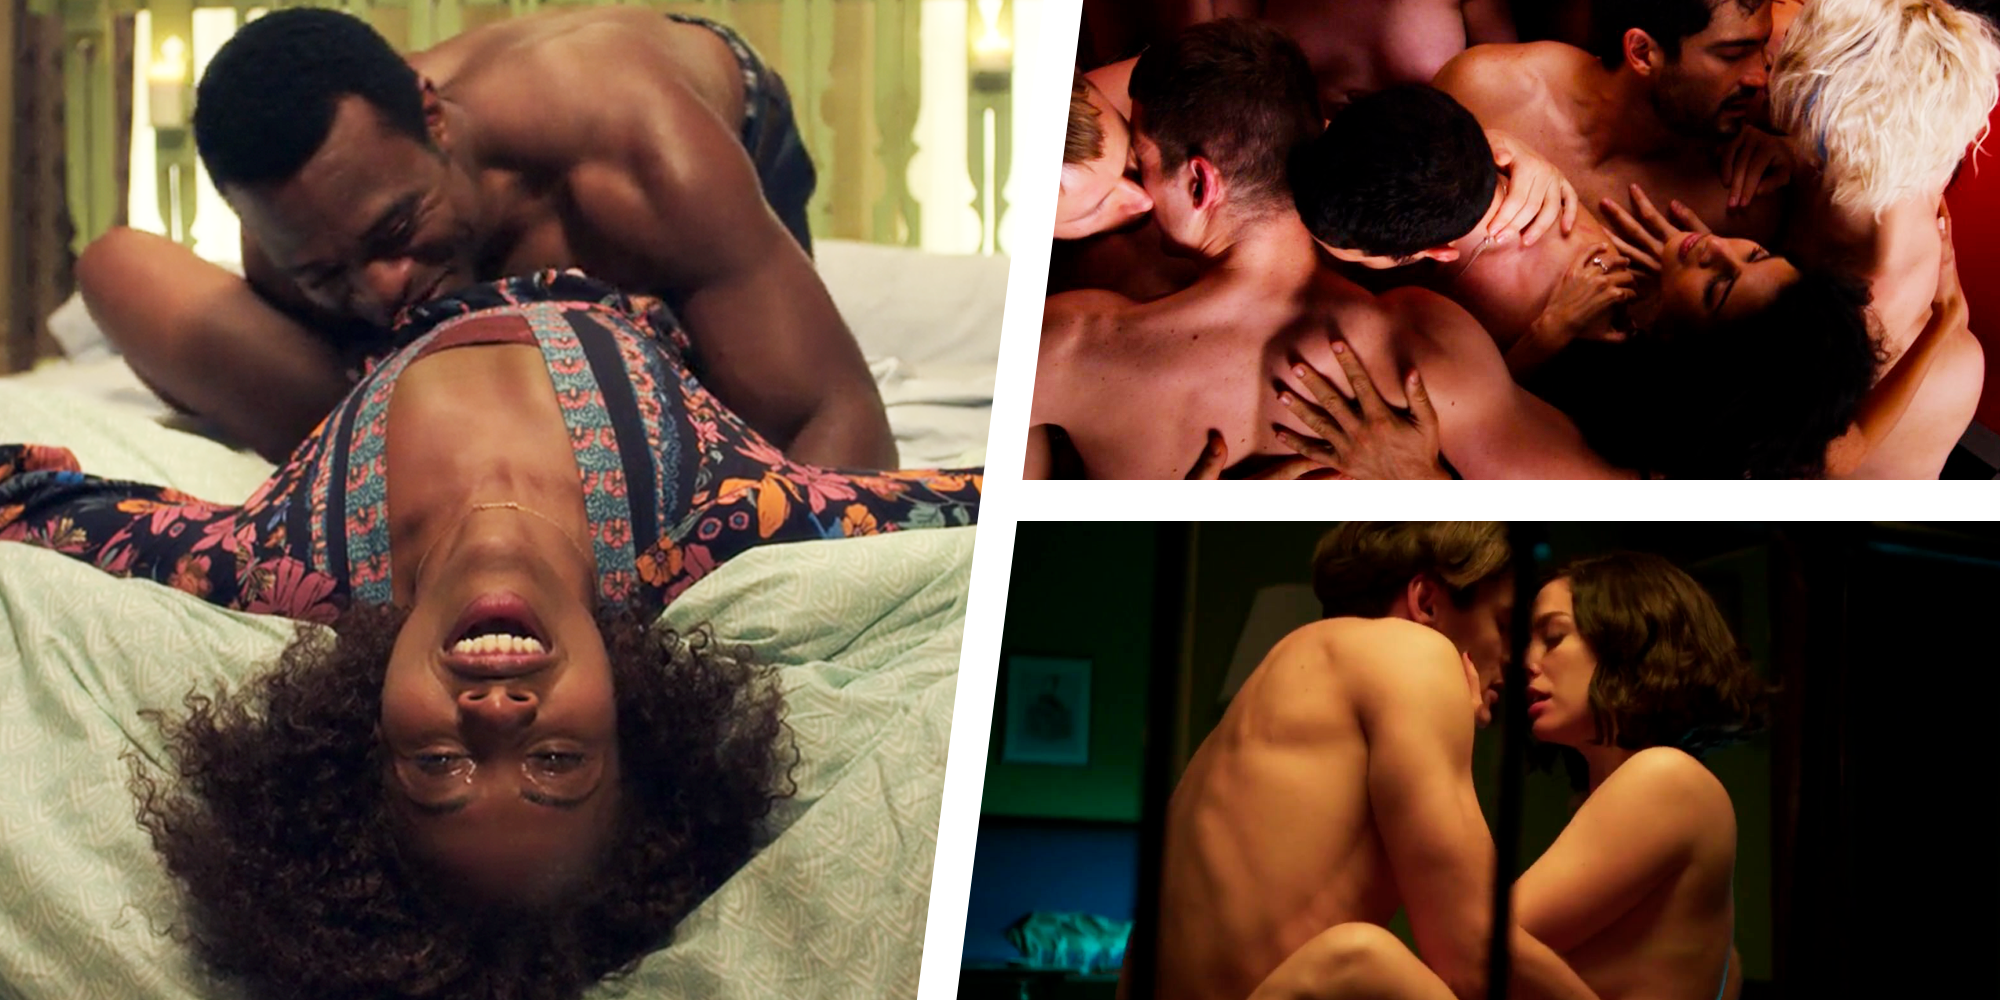 Netflix movies with strong sex scenes